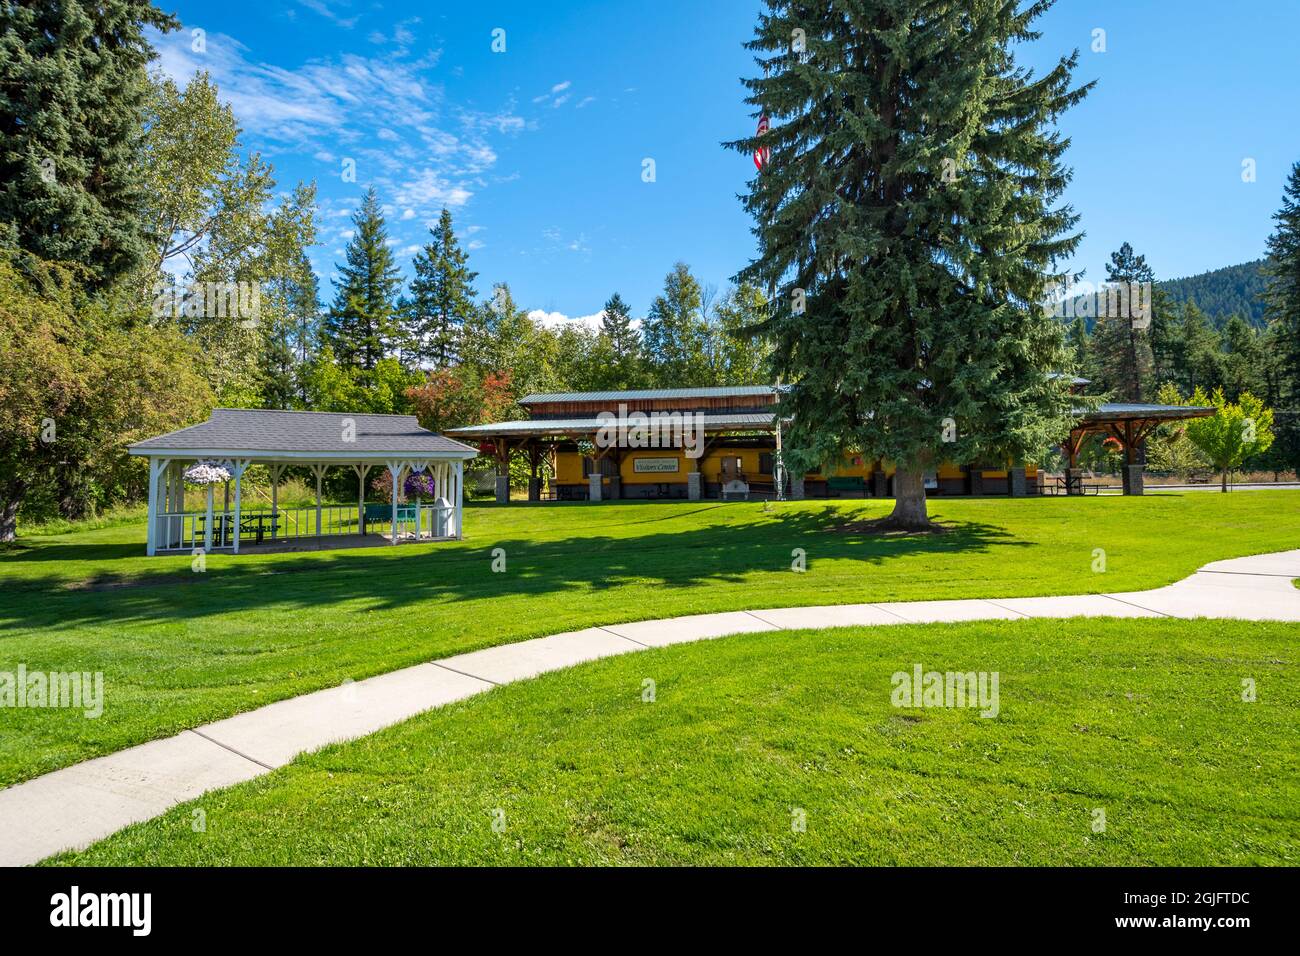 The Metaline Falls Visitor Center with a gazebo and park in the small border town of Metaline Falls, Washington. Stock Photo